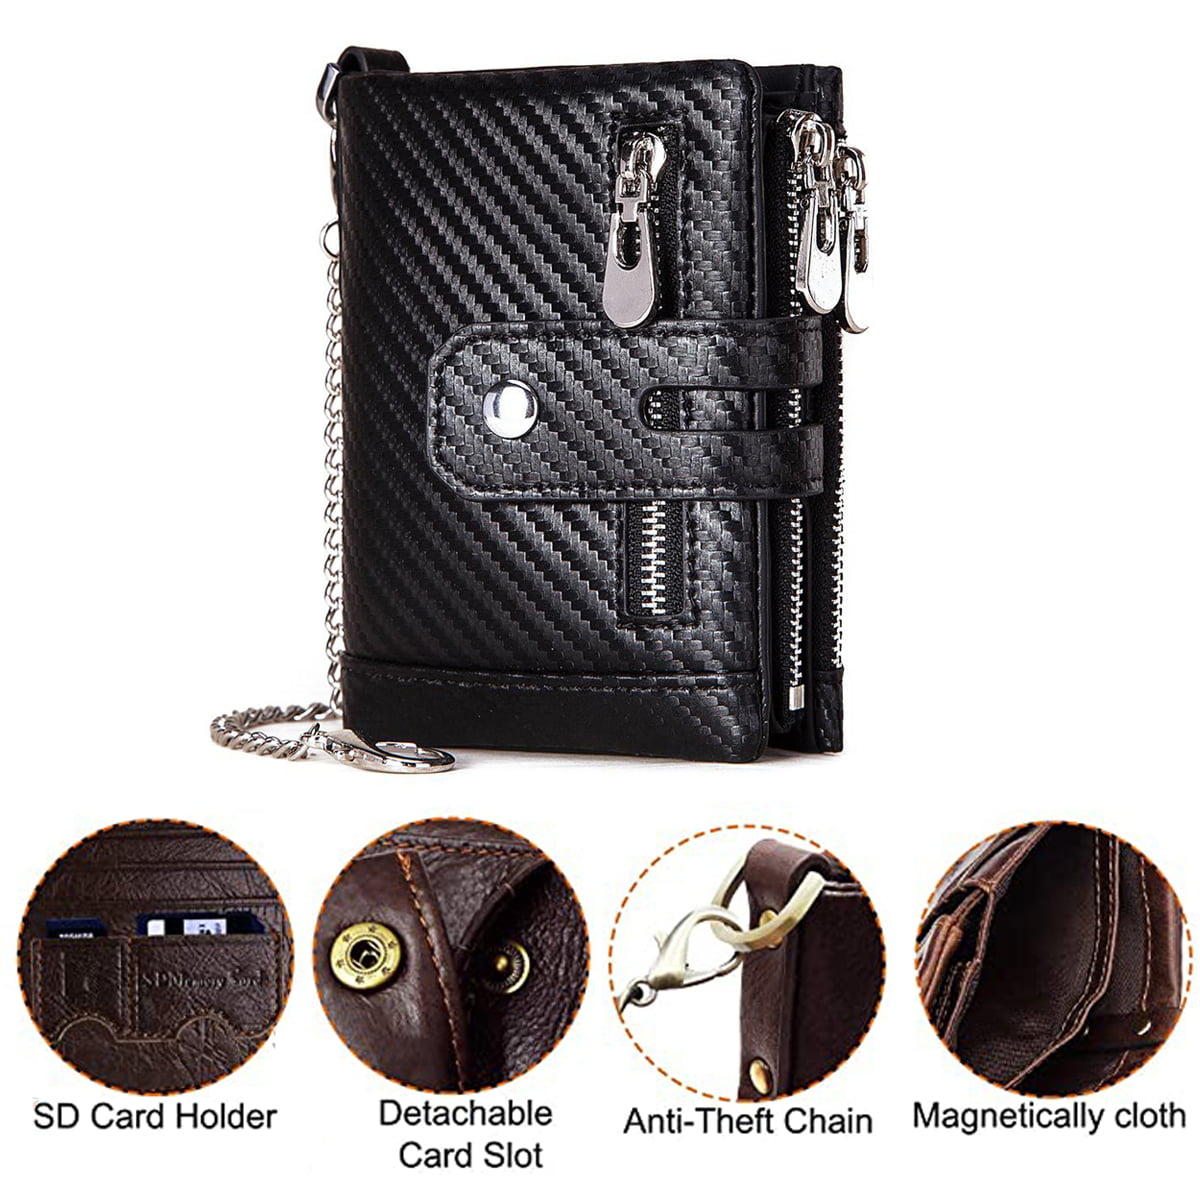 Leather Mens Wallet Luxury Mens\tpurse Male Zipper Card Holders With Coin  Pocket Rfid Wallets Gifts For Men Money Bag